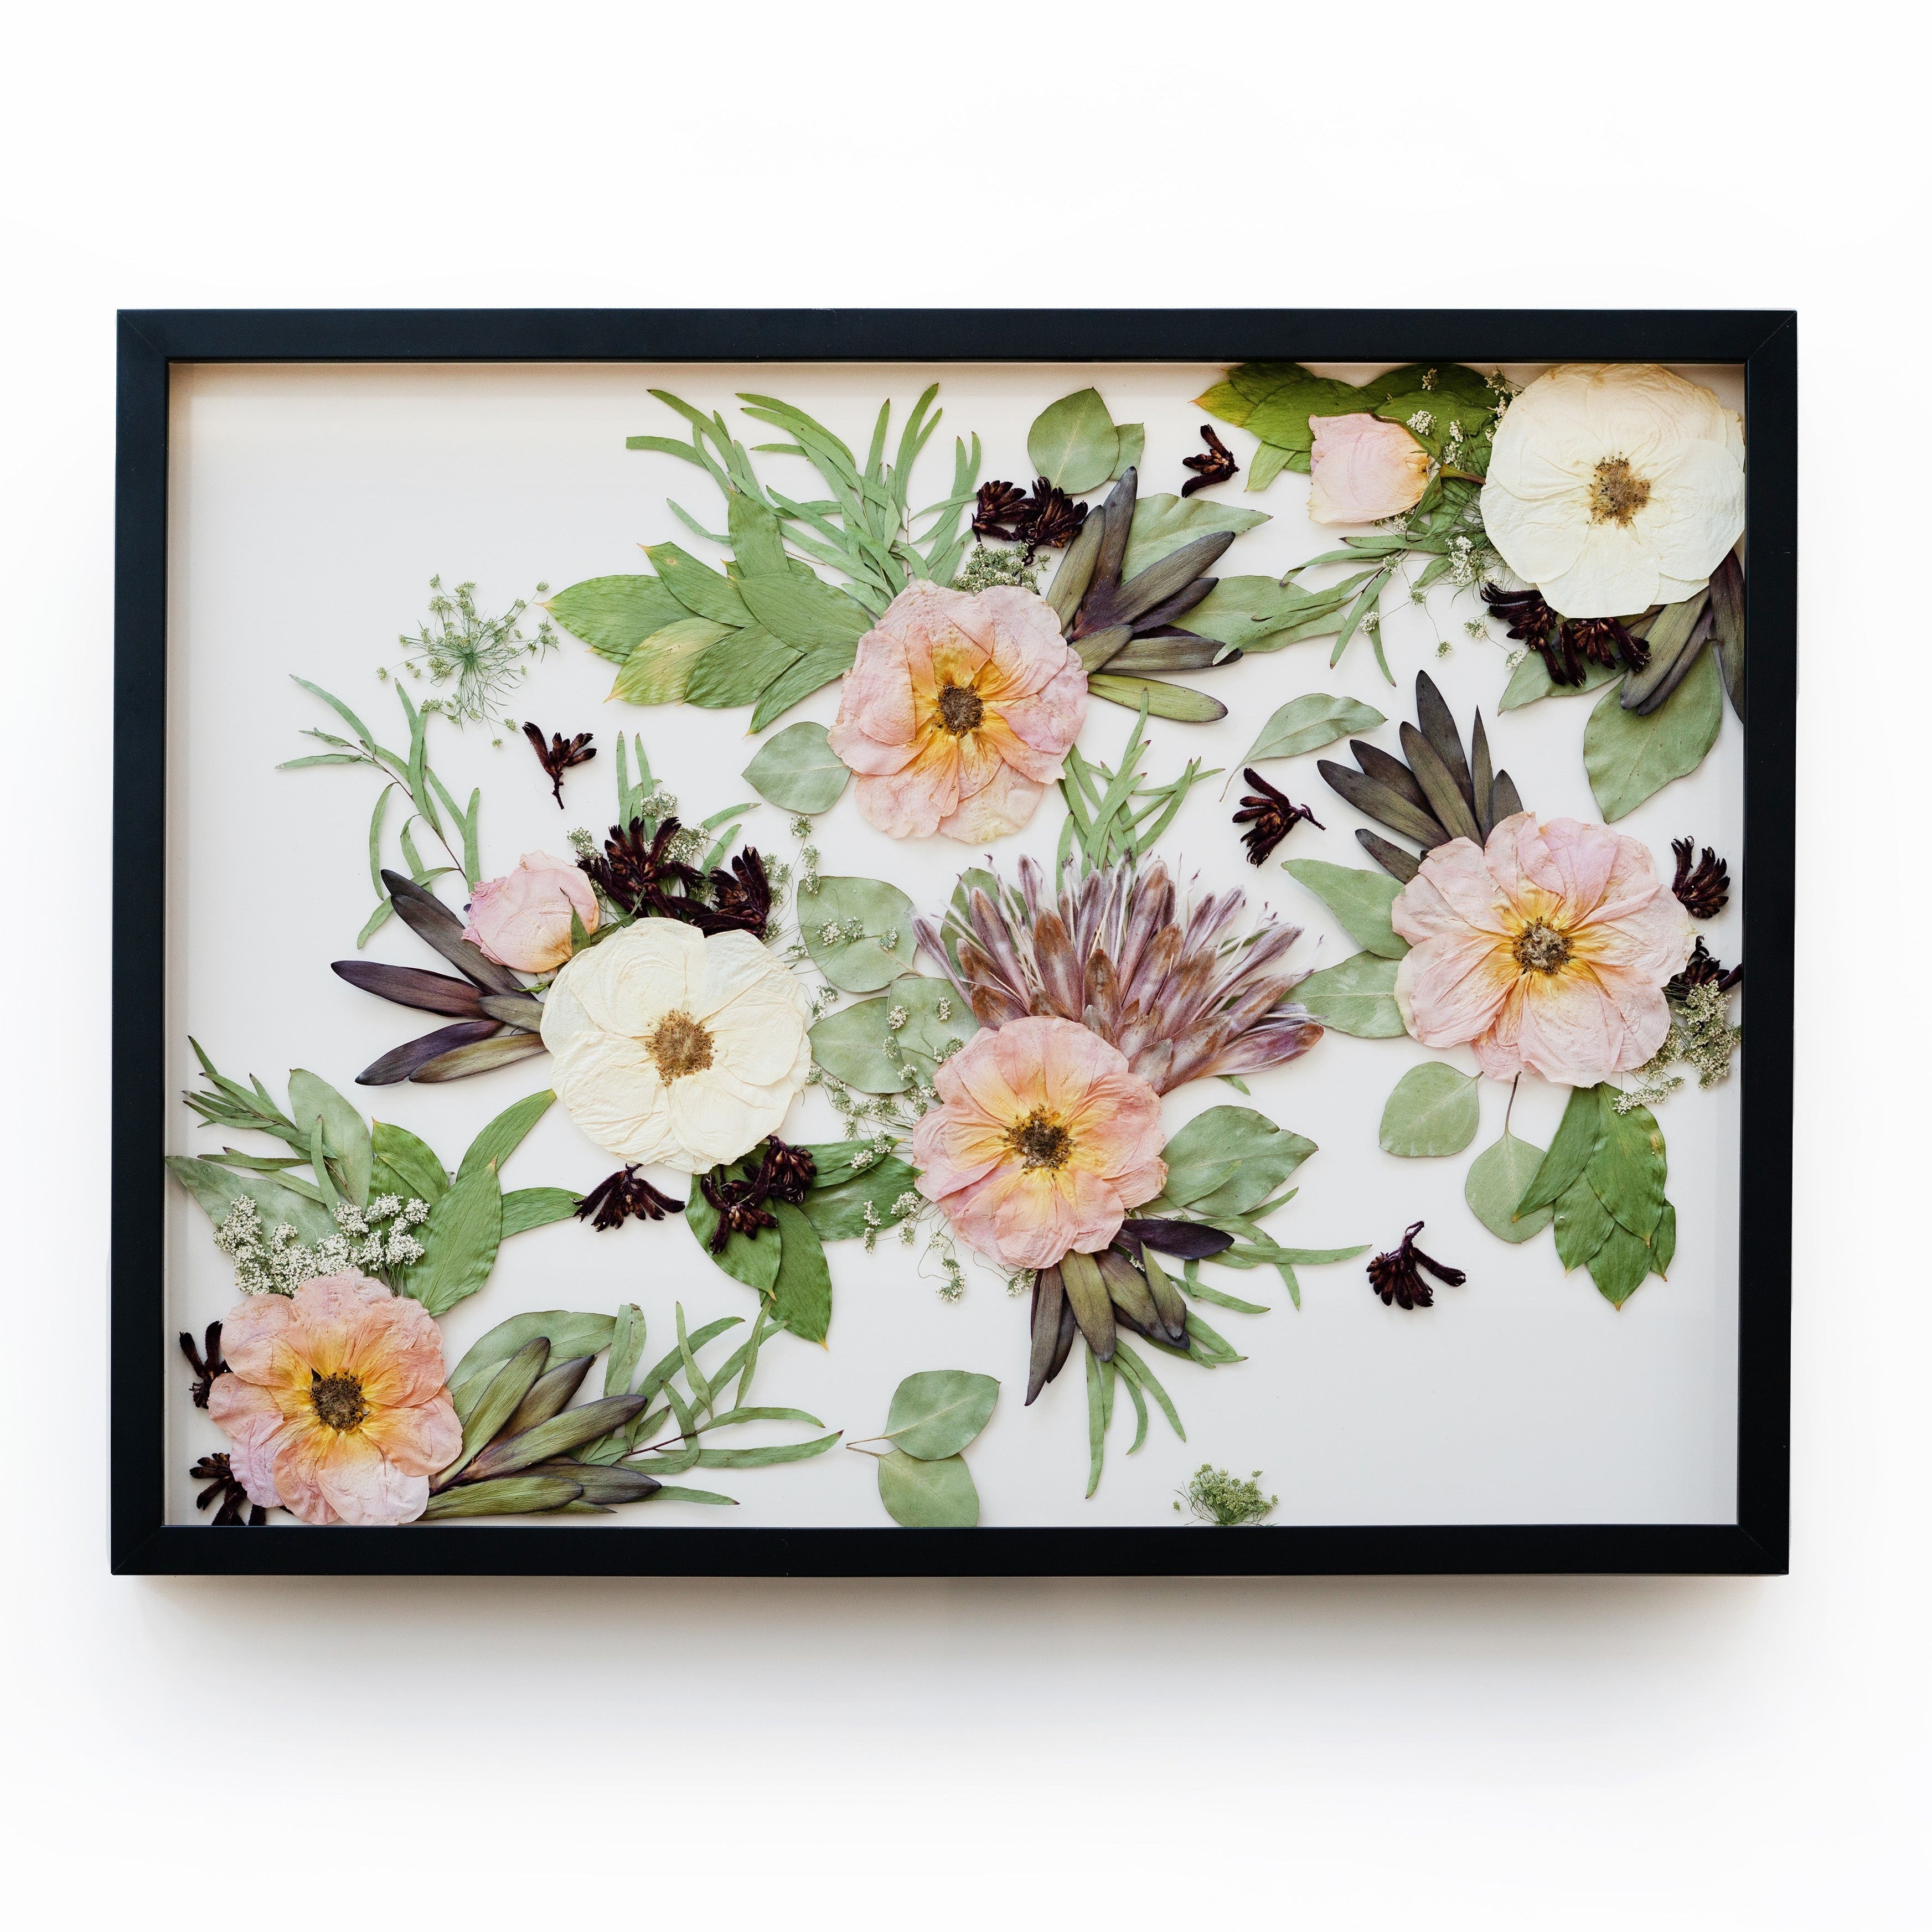 UO DIY: How to Press and Frame Flowers - Urban Outfitters - Blog